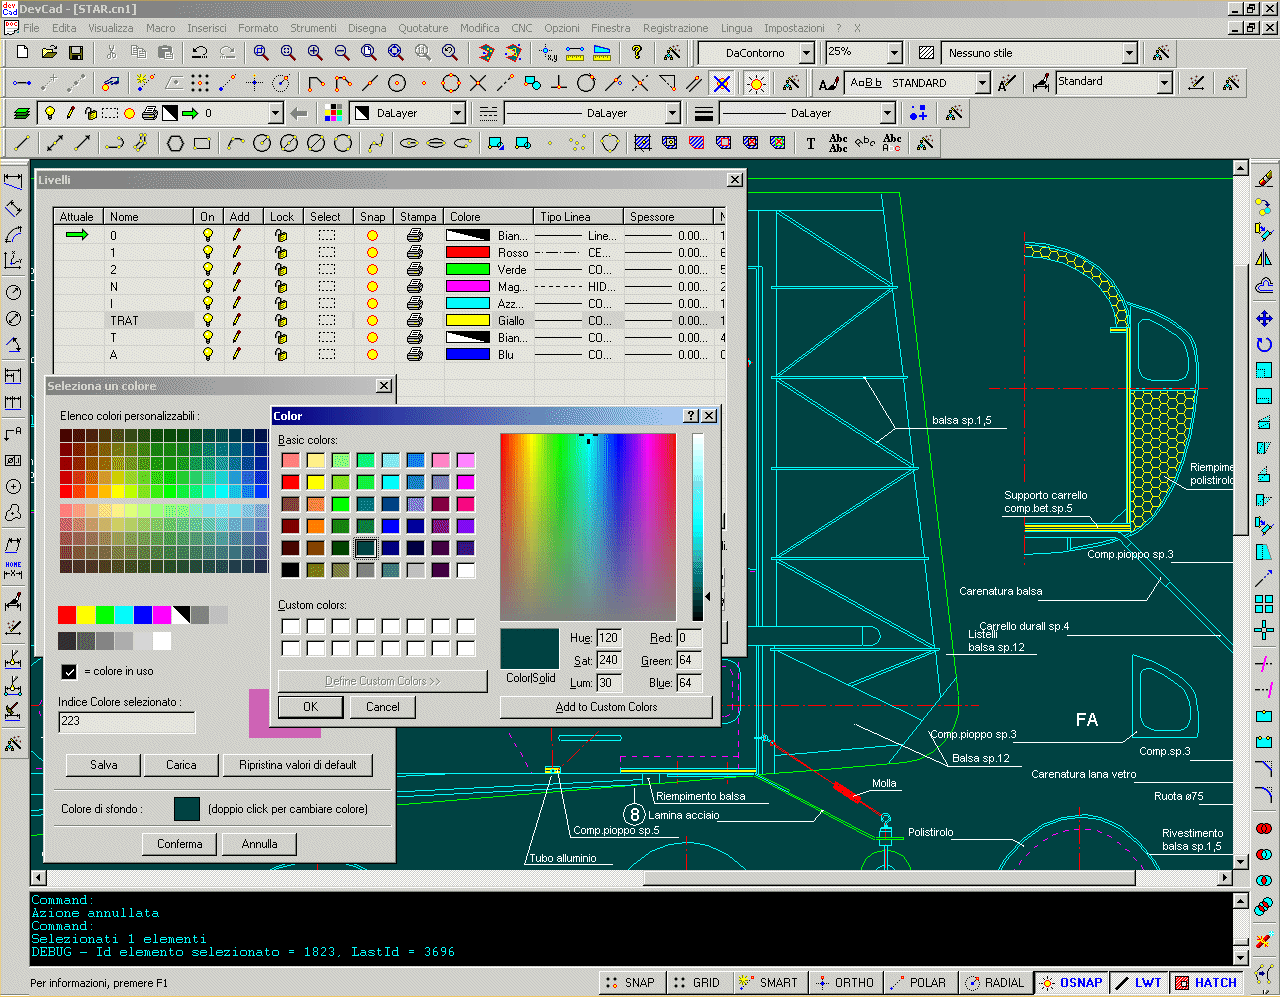 http://www.devcad.com/images/preview.gif